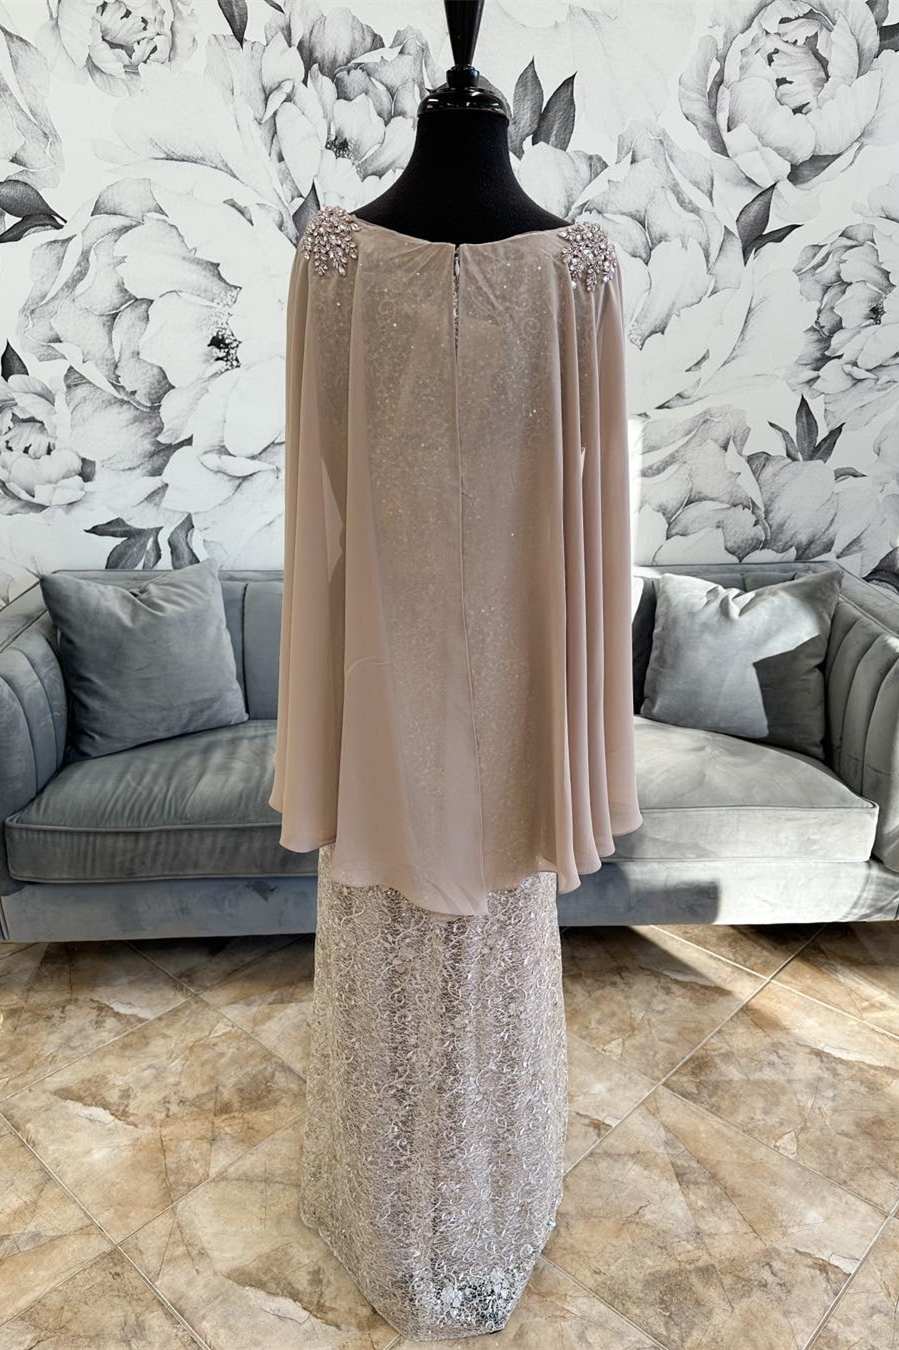 Gray Lace Beaded Long Formal Dress with Cape